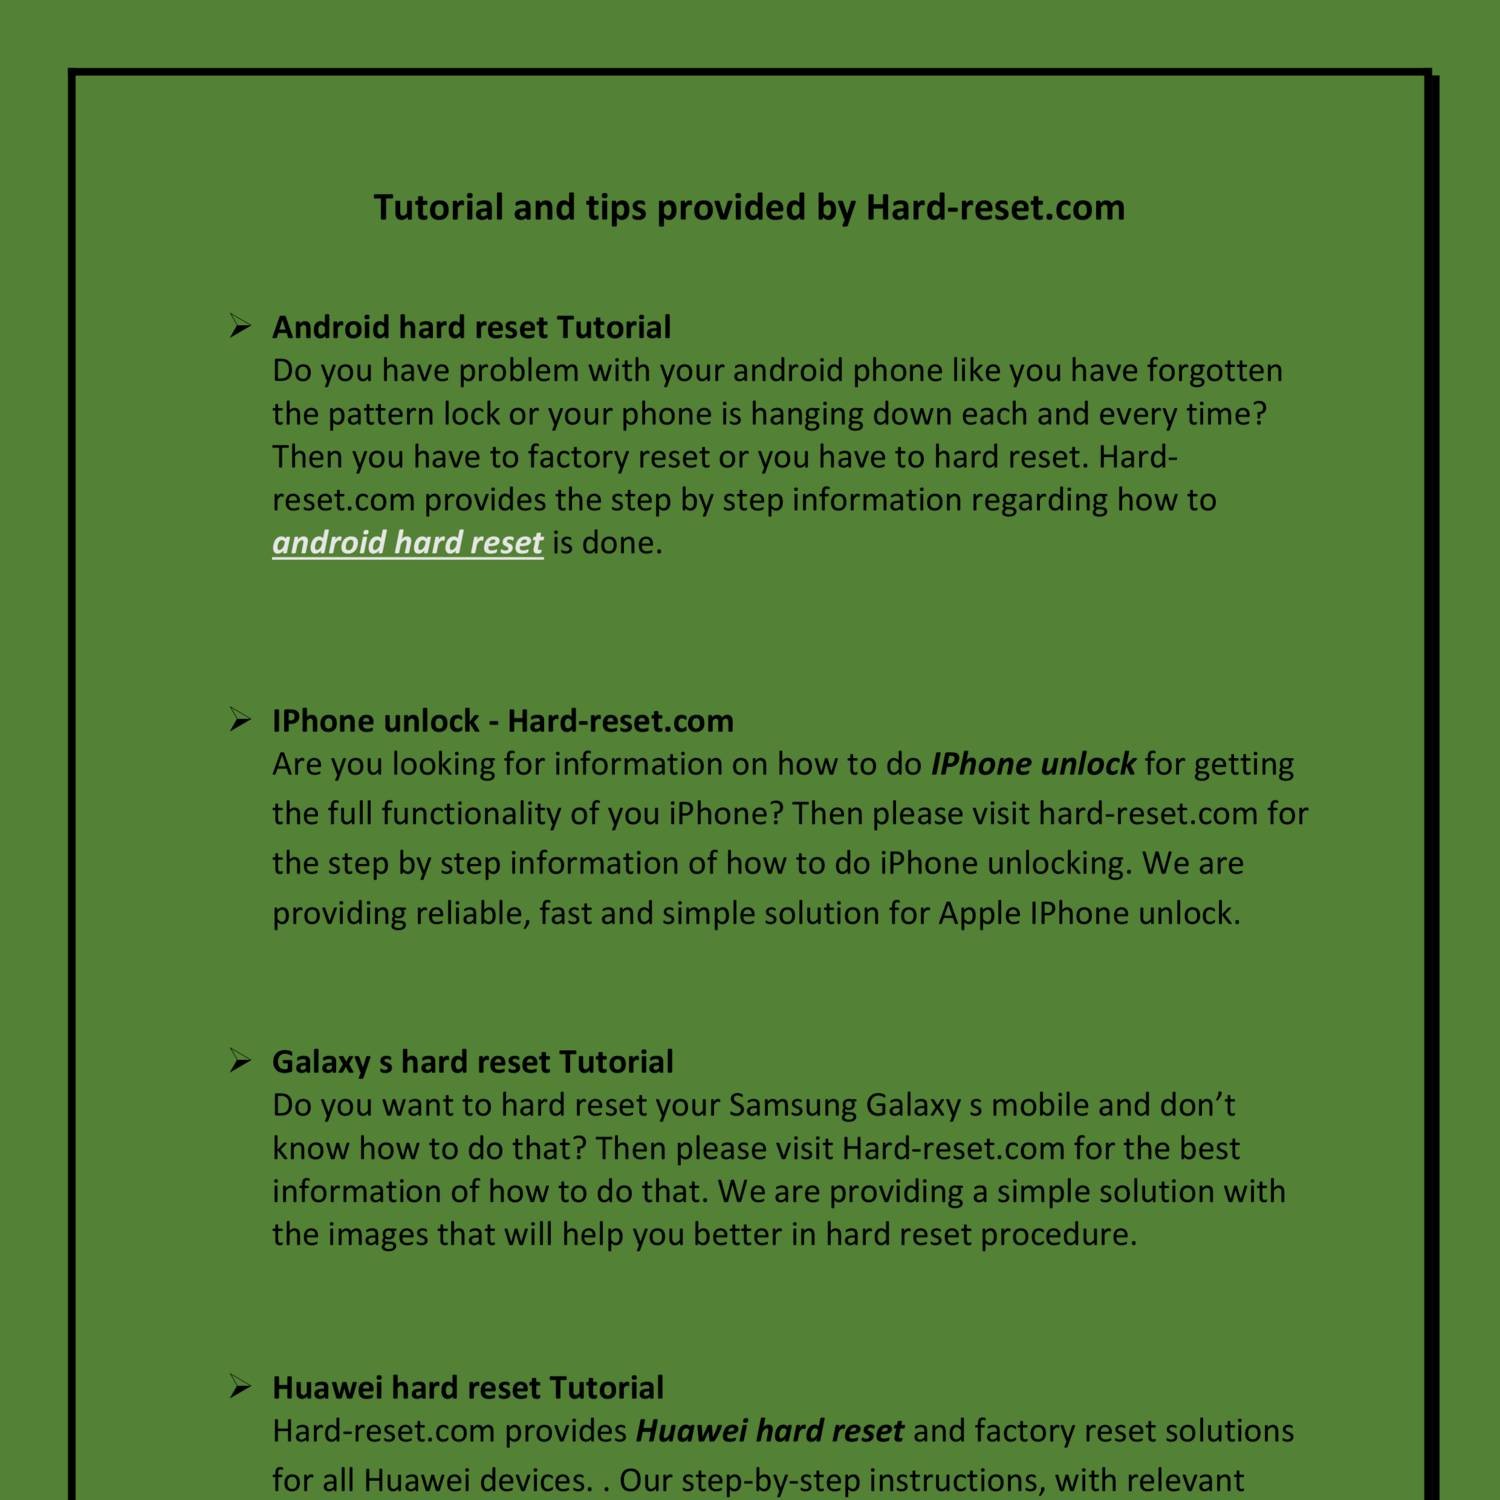 Android hard reset Tutorial.pdf | DocDroid